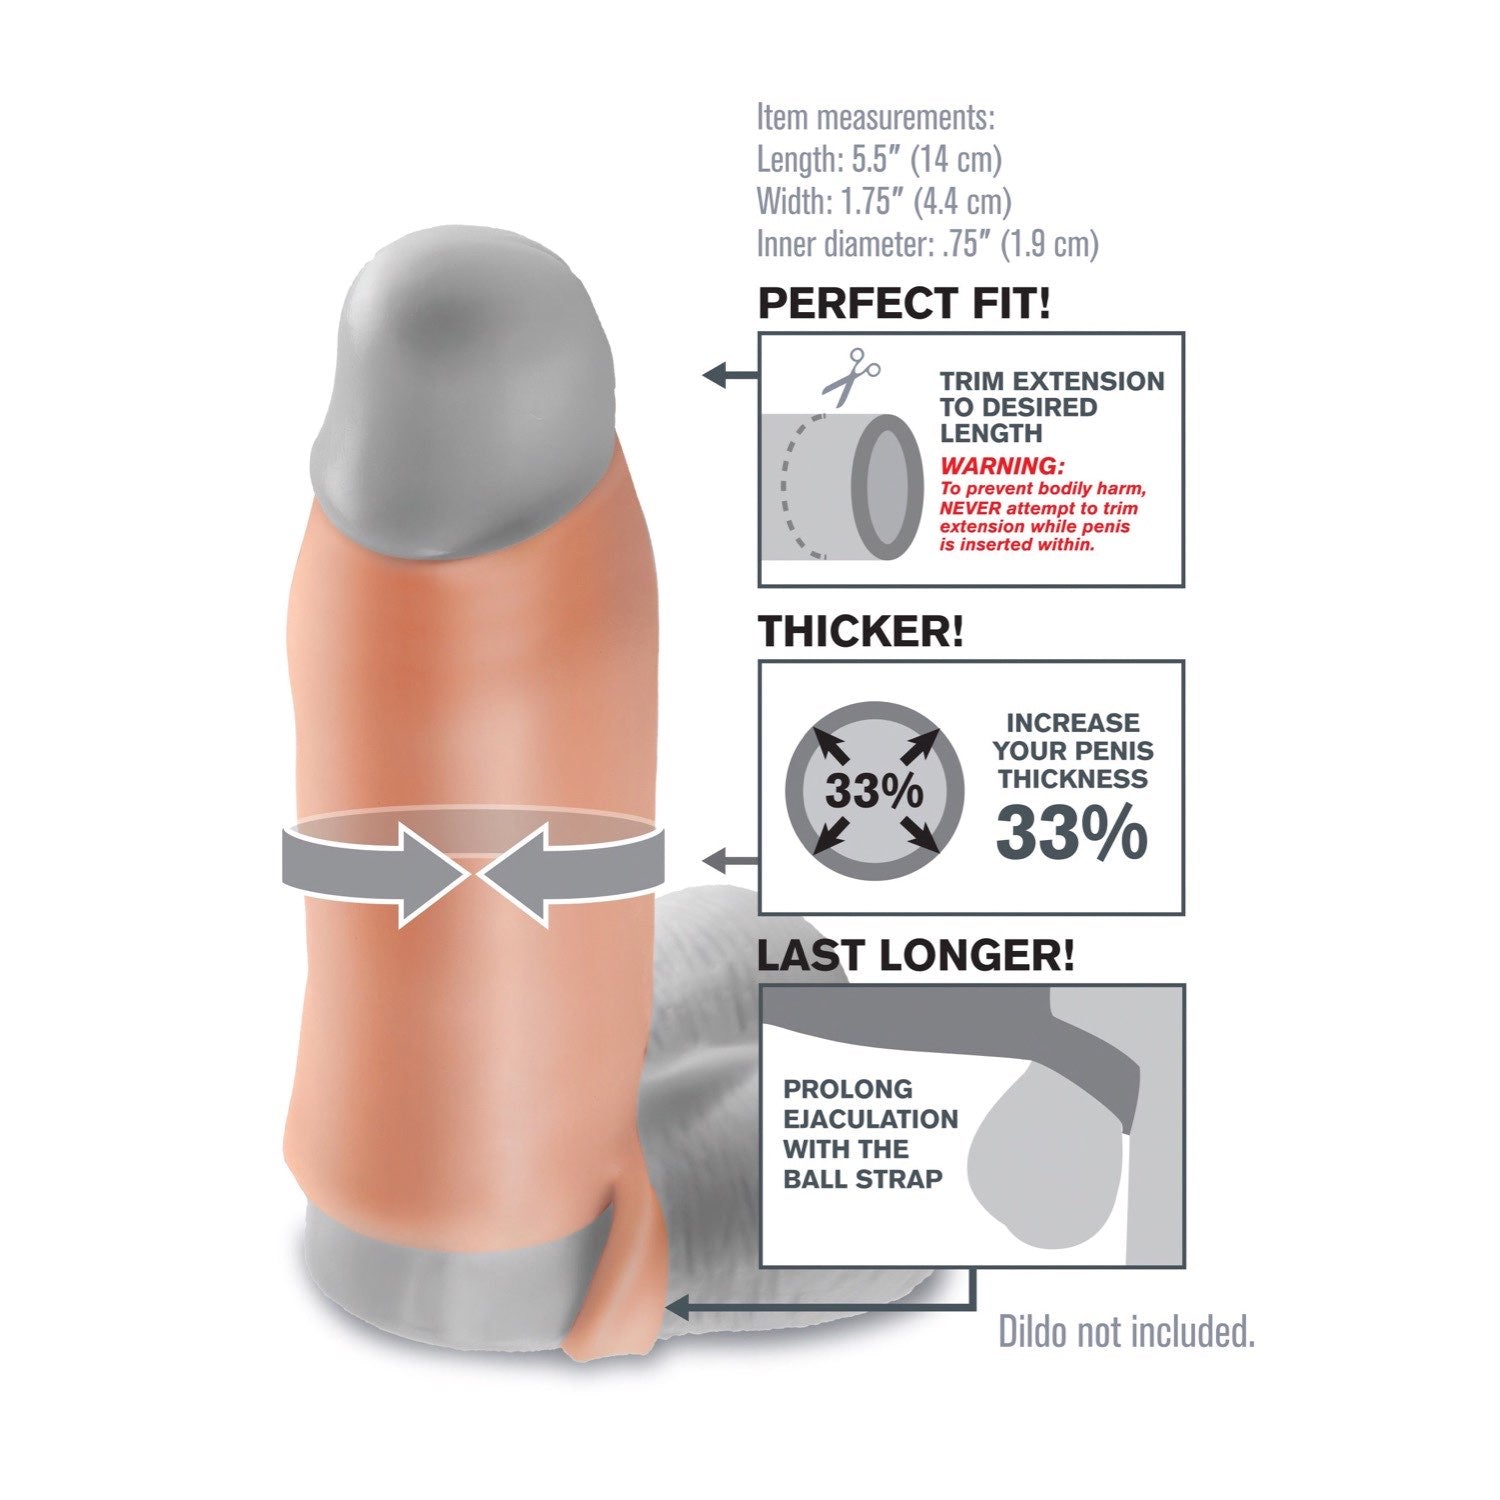 Fantasy X-Tensions Real Feel Enhancer - Flesh Girth Enhancing Penis Sleeve with Ball Strap by Pipedream